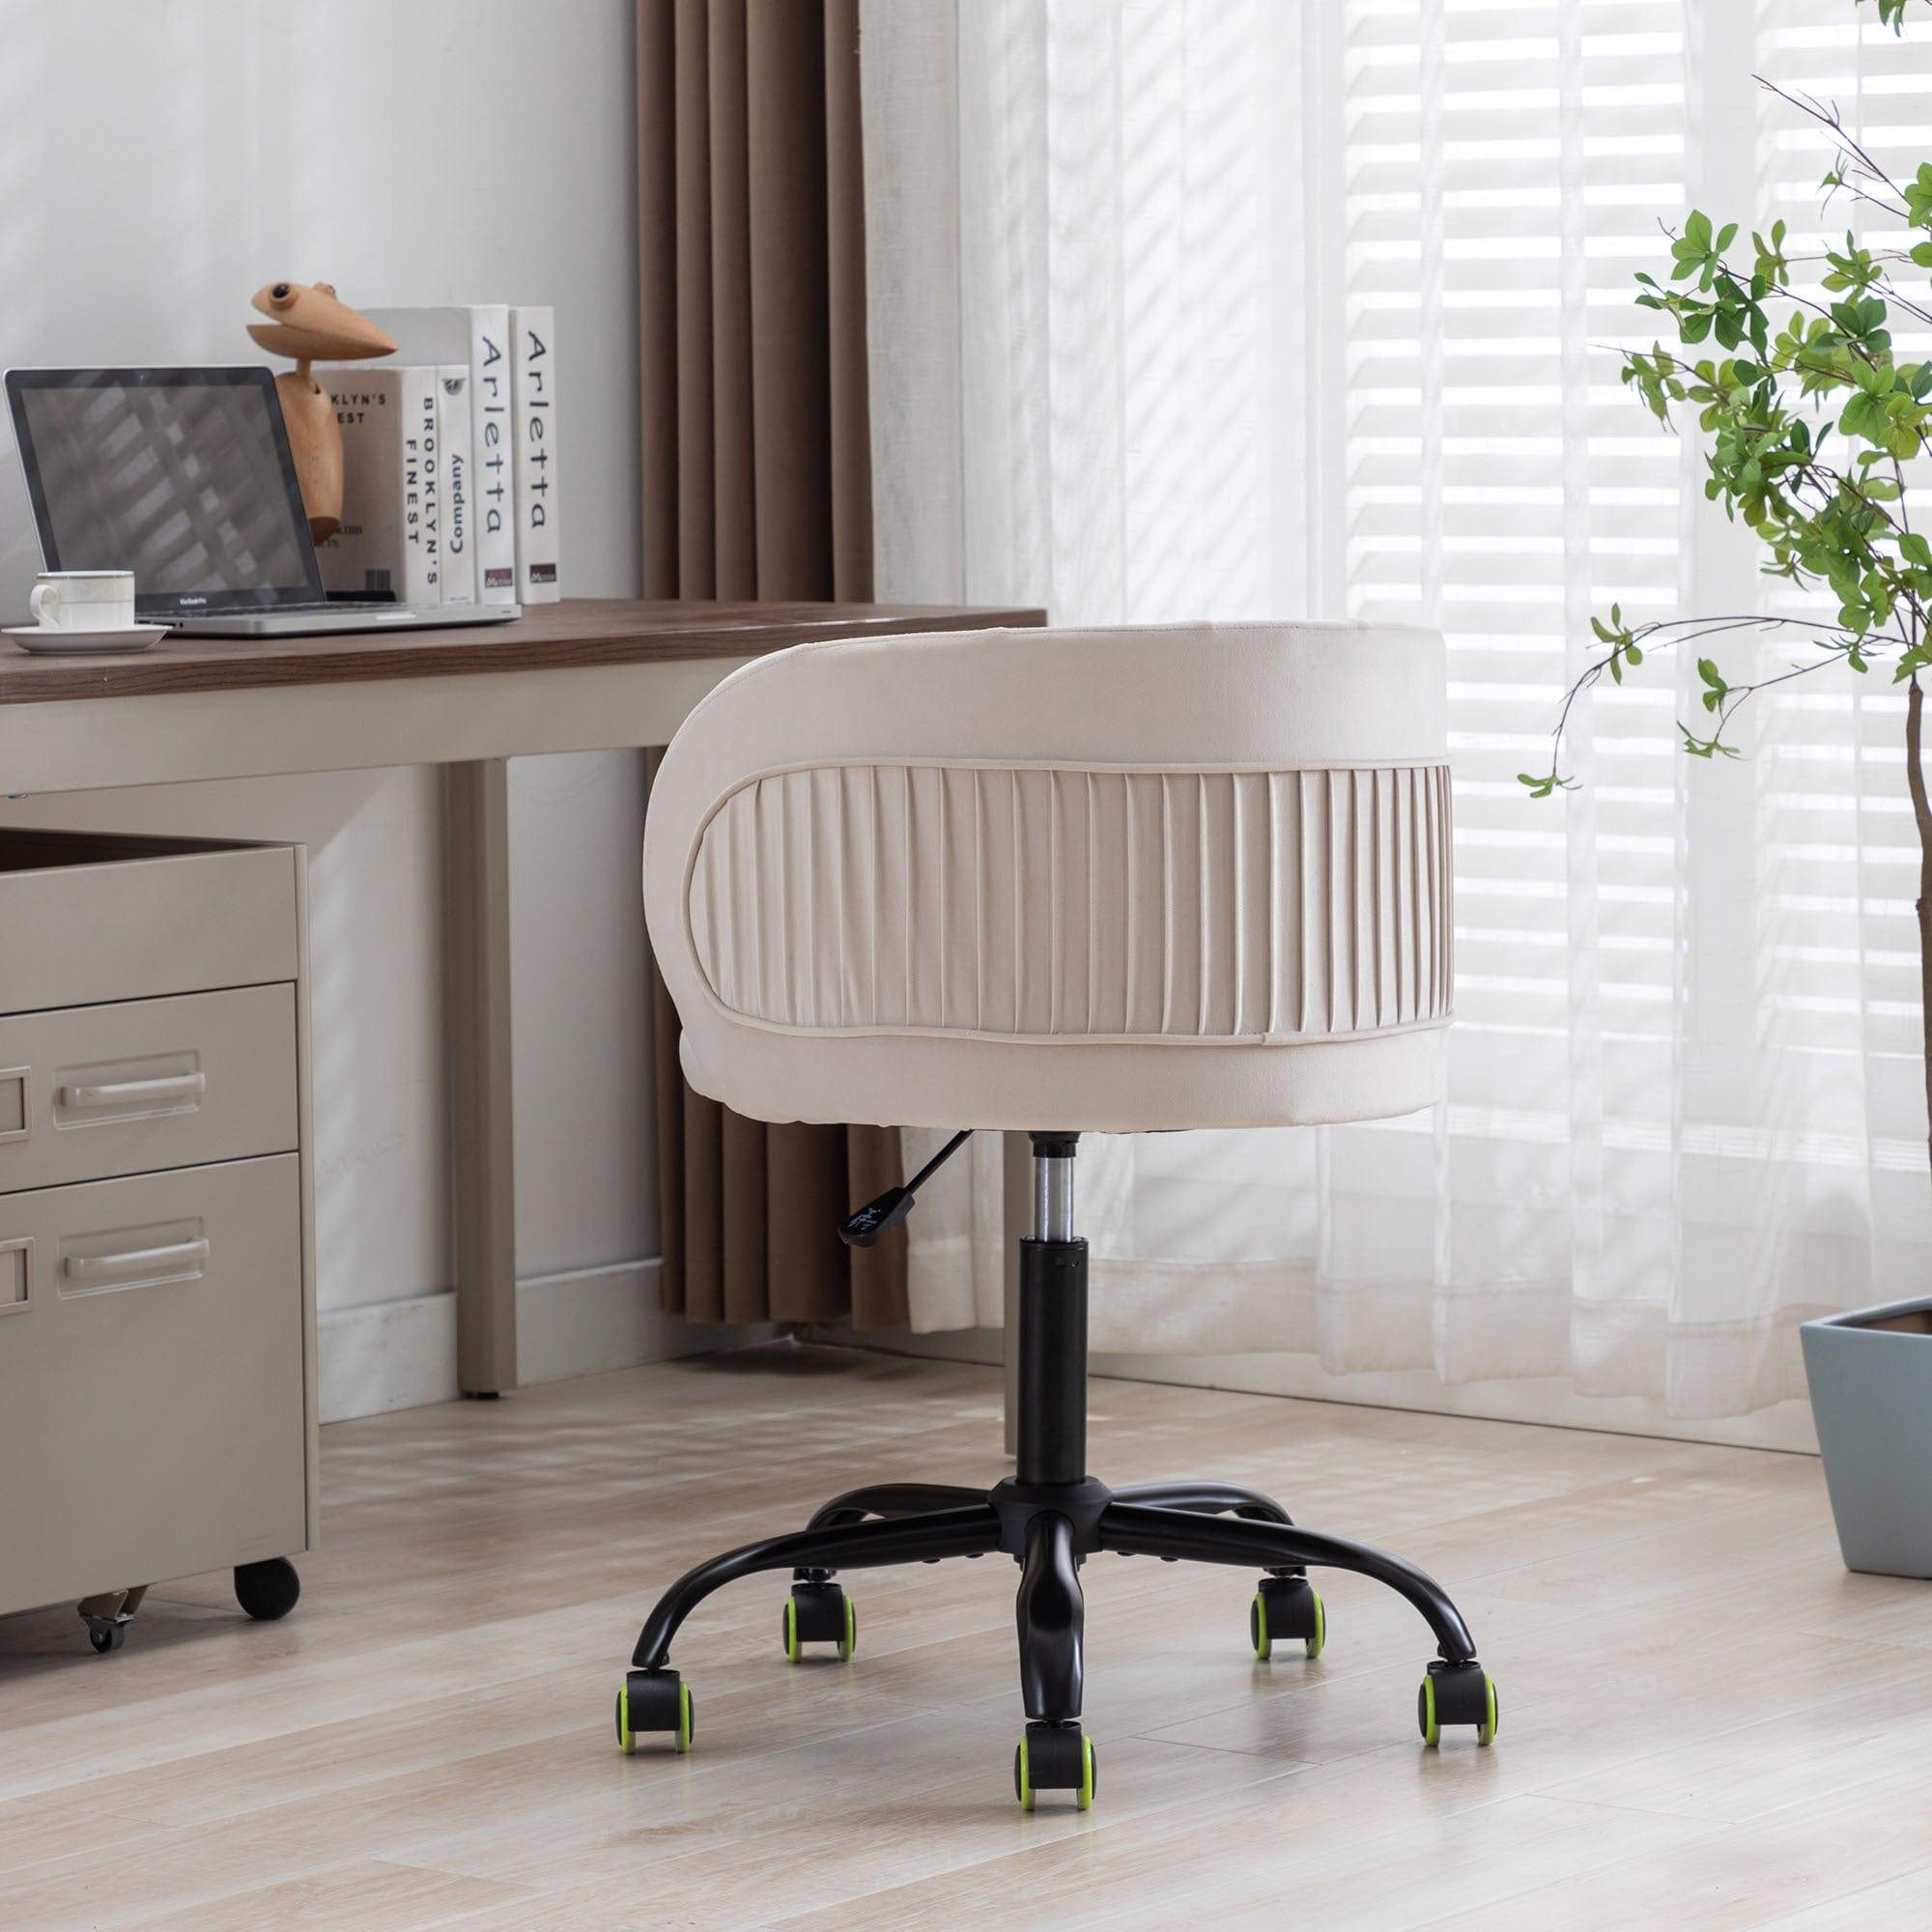 Shop Zen Zone Velvet Leisure office chair, suitable for study and office, can adjust the height, can rotate 360 degrees, with pulley, Off-White Mademoiselle Home Decor